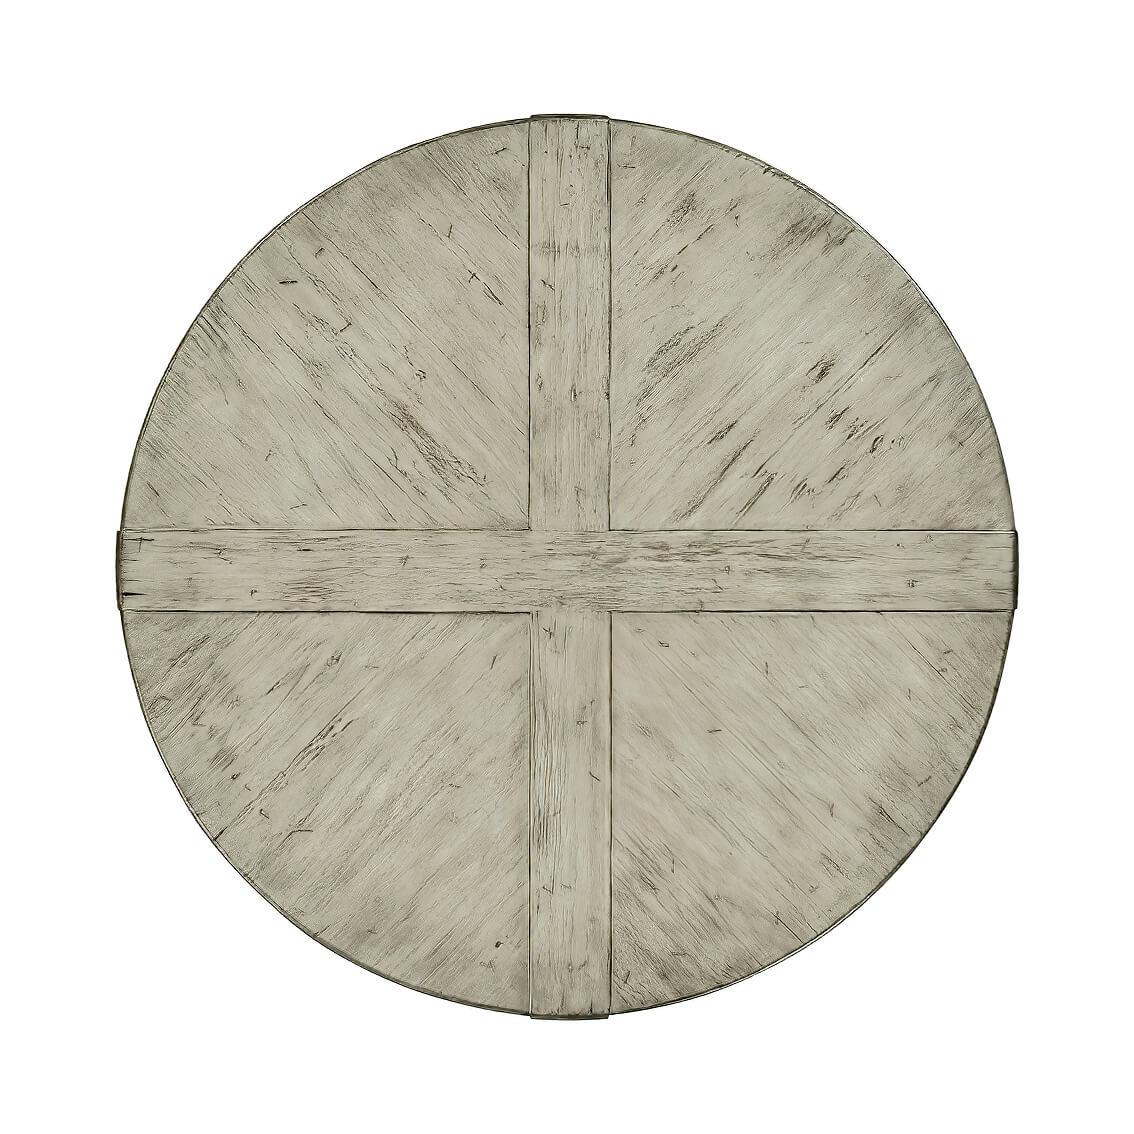 A round dining table finished in a greyed wash color with a rustic finish showing exposed saw marks and set on a bracketed country kitchen base.

Dimensions: 48